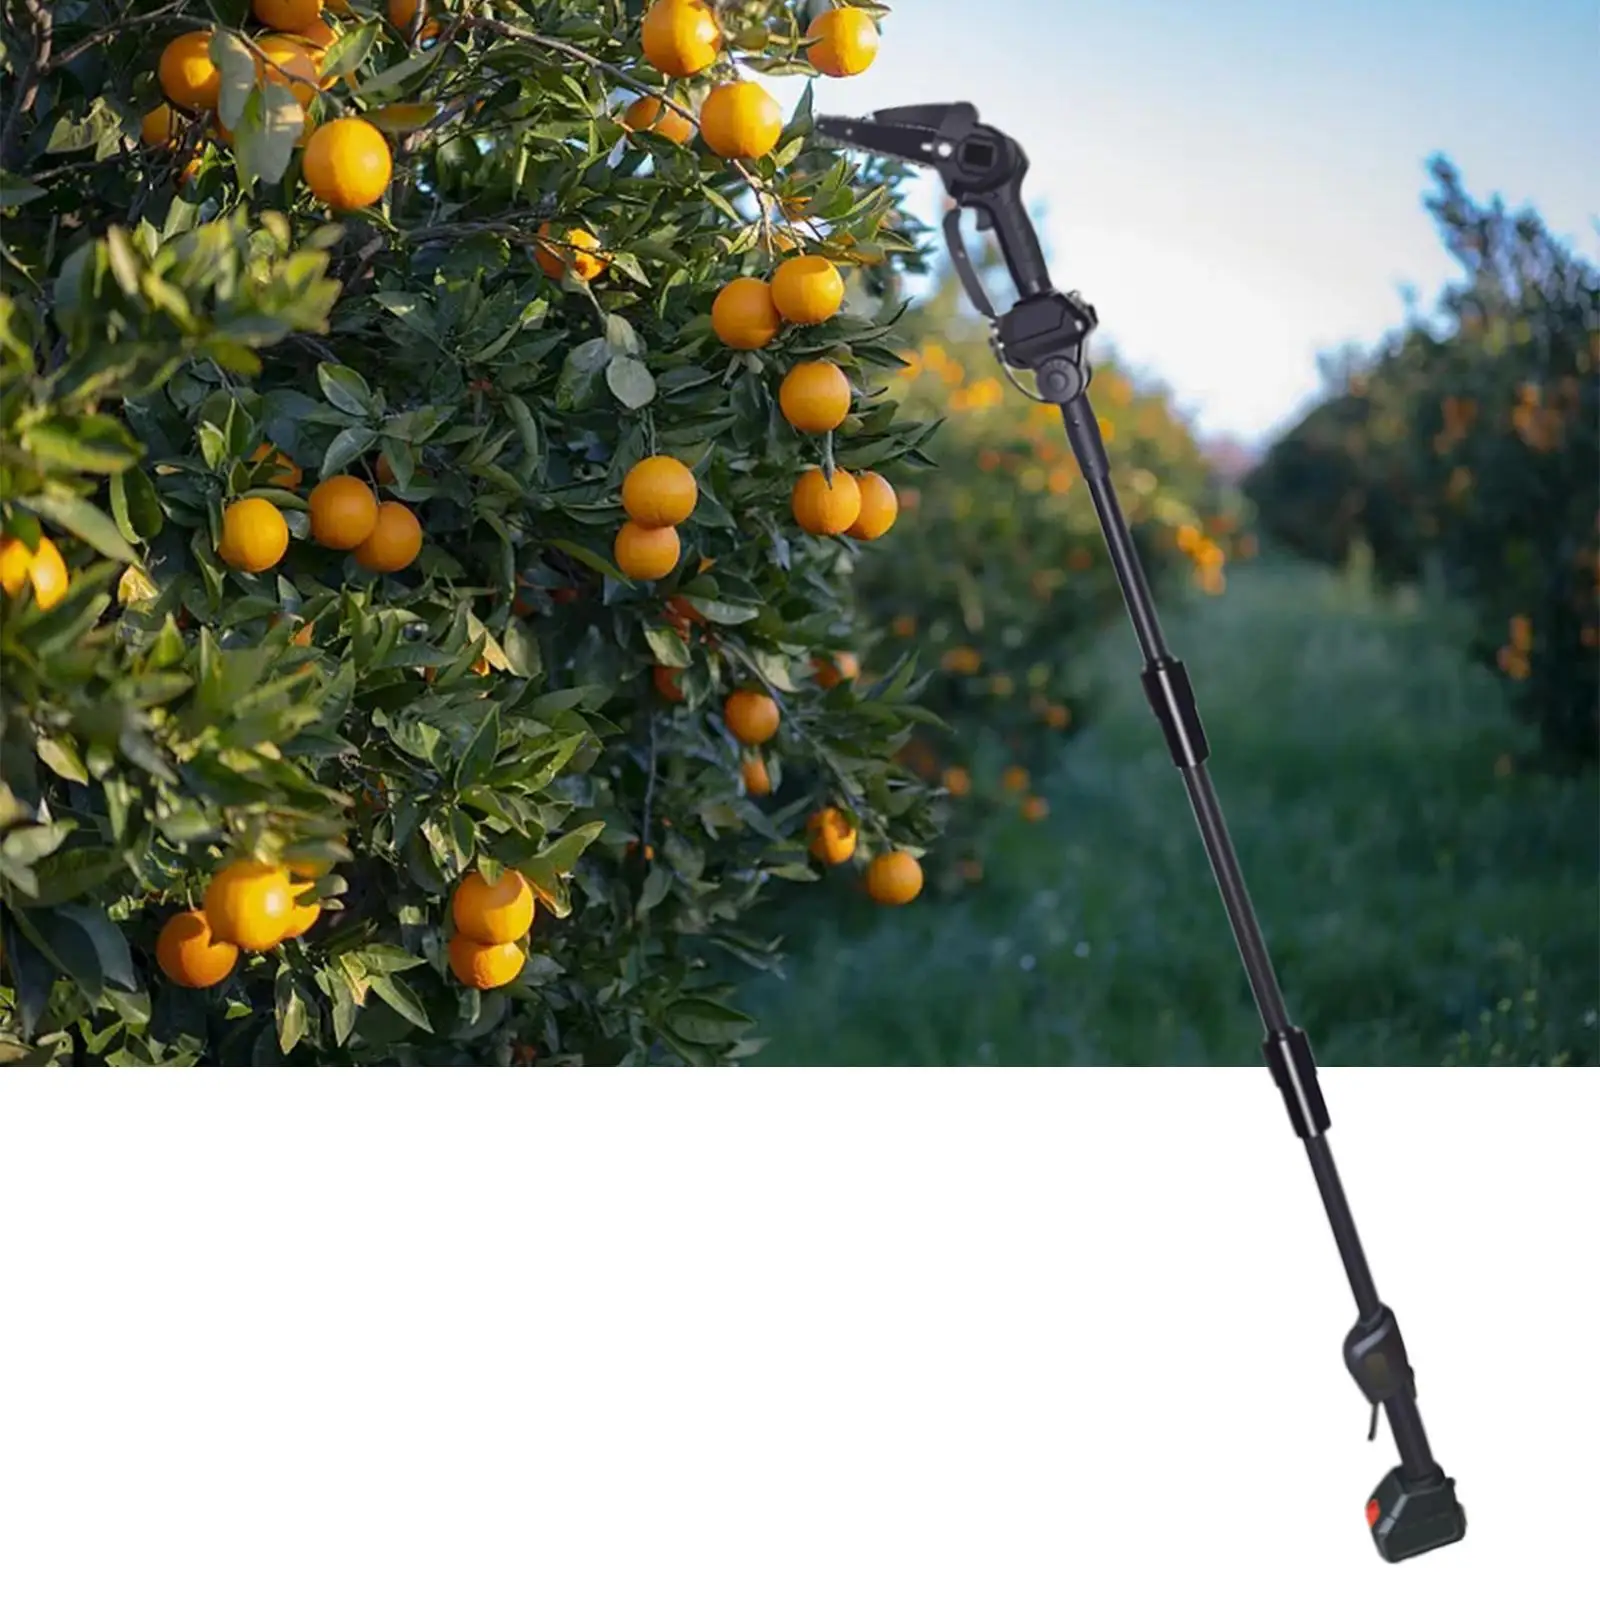 Electric Telescoping Pole Saw Detachable Chainsaw Cordless Electric Chainsaw Pole Saws for Tree Trimming Tree Pruning